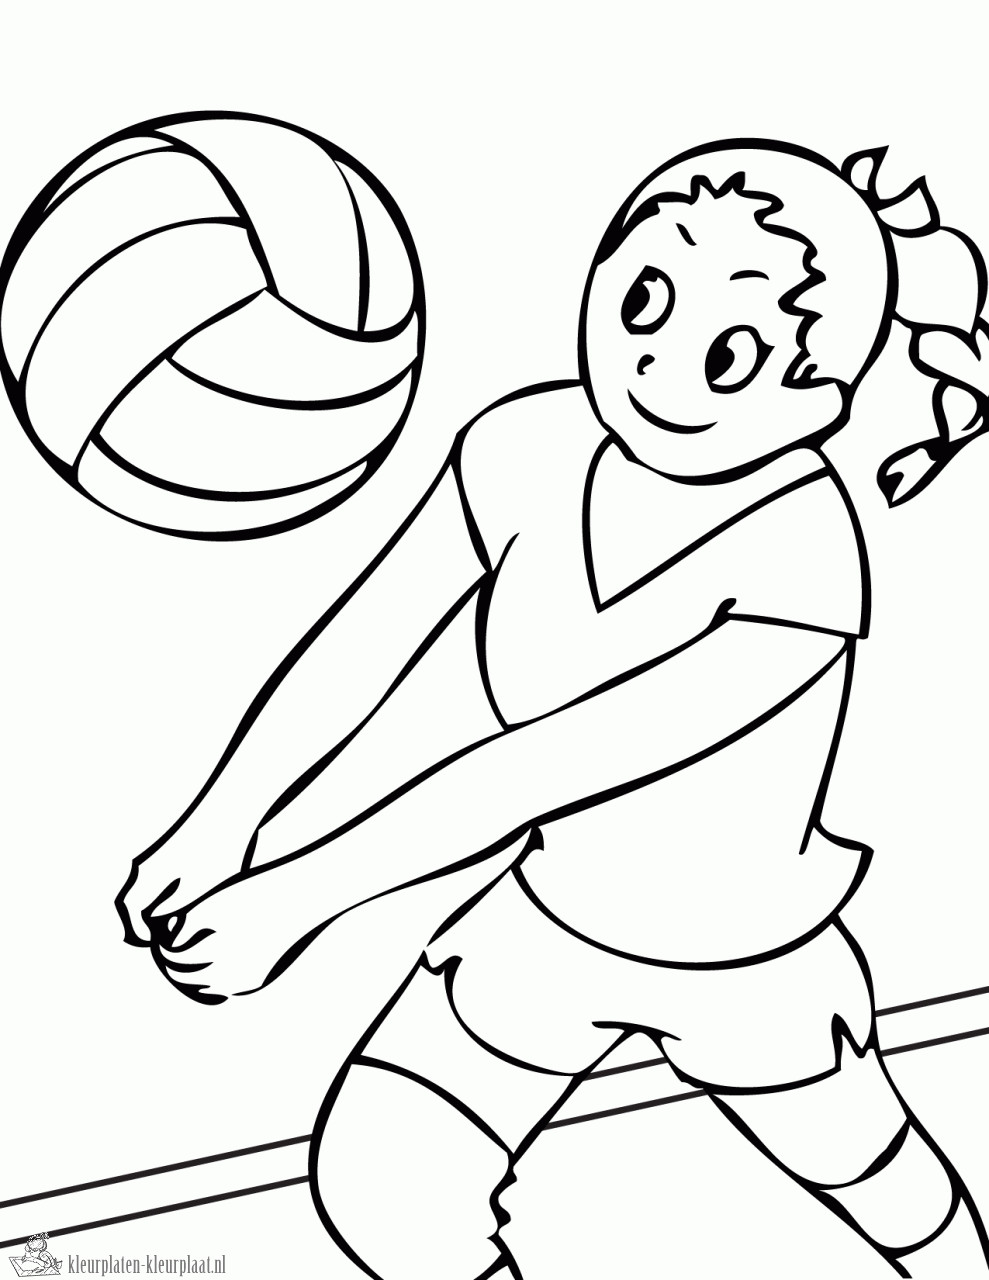 Sports Coloring Pages Printable
 1000 images about Sport Kleurplaten on Pinterest